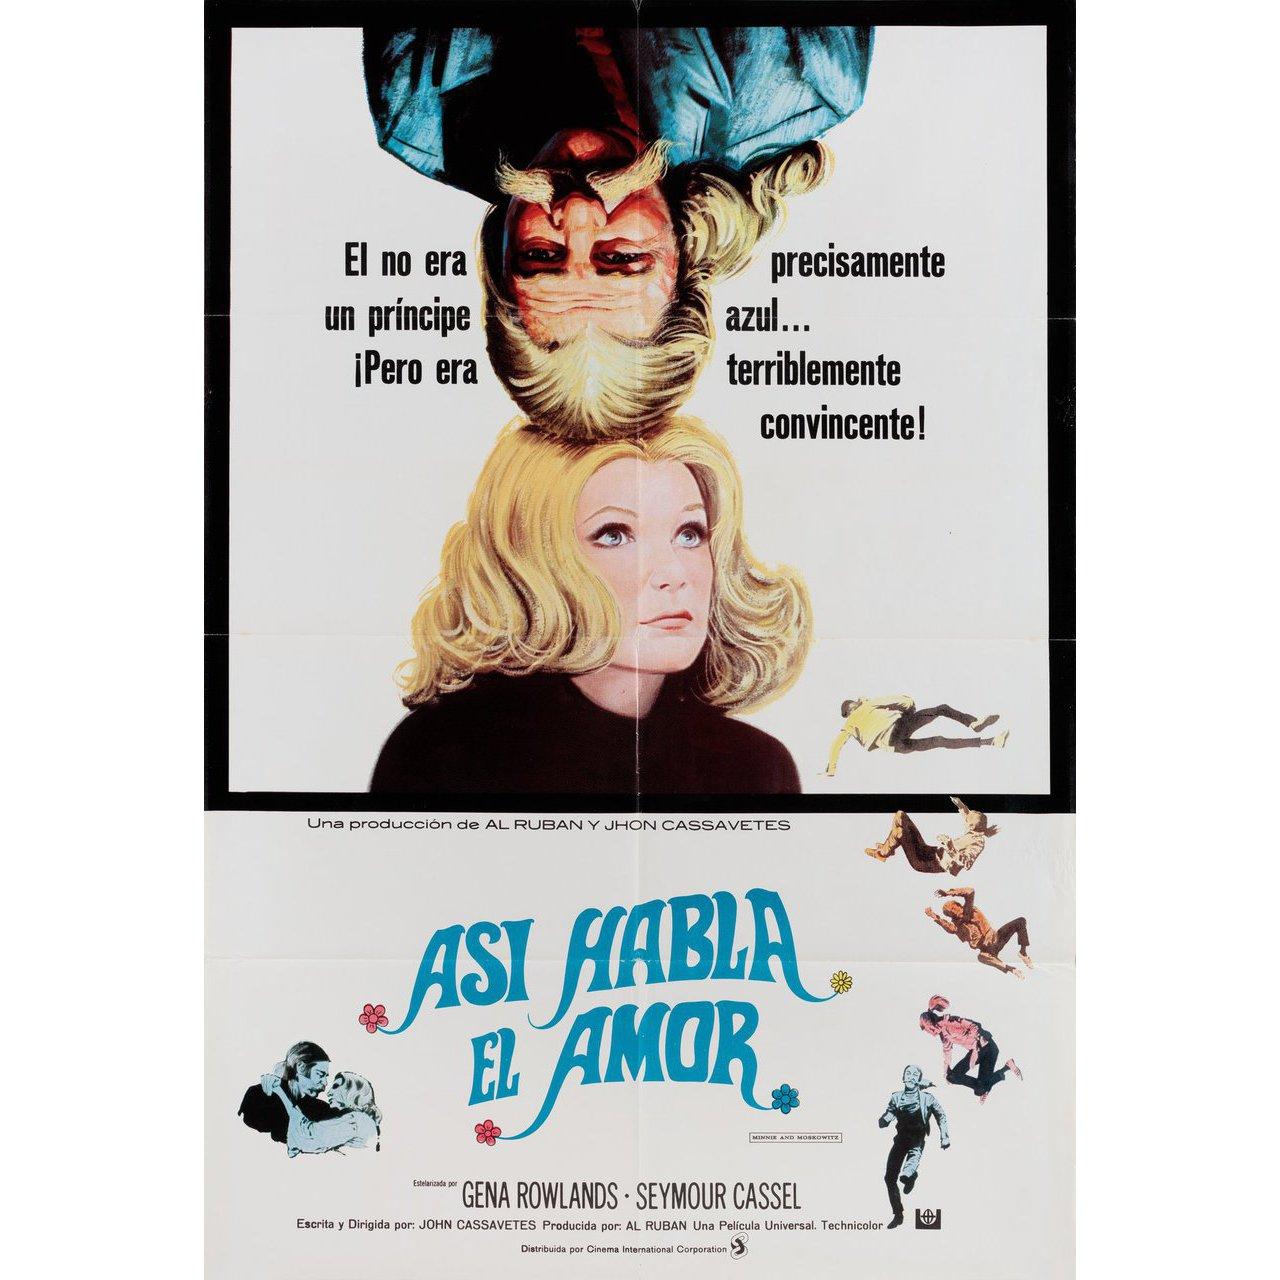 Original 1971 Spanish B1 poster for the film Minnie and Moskowitz directed by John Cassavetes with Gena Rowlands / Seymour Cassel / Val Avery / Timothy Carey. Very Good-Fine condition, folded. Many original posters were issued folded or were